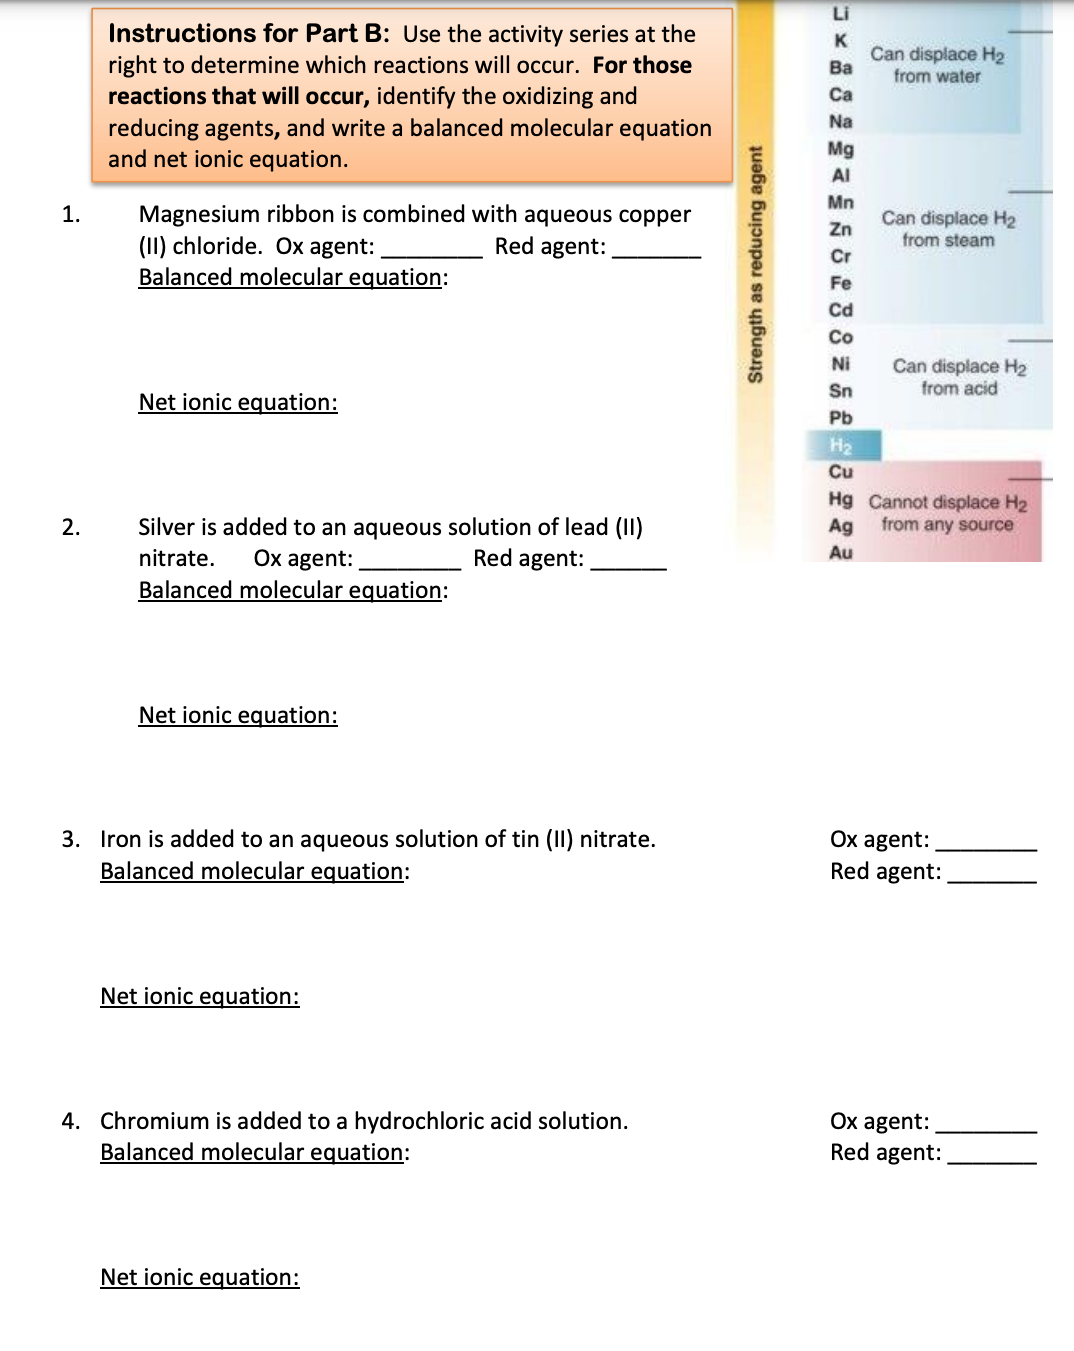 Li
Instructions for Part B: Use the activity series at the
right to determine which reactions will occur. For those
reactions that will occur, identify the oxidizing and
reducing agents, and write a balanced molecular equation
and net ionic equation.
K
Can displace H2
Ba
from water
Ca
Na
Mg
AI
Mn
Magnesium ribbon is combined with aqueous copper
(II) chloride. Ox agent:
Balanced molecular equation:
1.
Can displace H2
Zn
Red agent:
from steam
Cr
Fe
Cd
Co
Can displace H2
from acid
Ni
Sn
Net ionic equation:
Pb
H2
Cu
Hg Cannot displace H2
Ag from any source
Silver is added to an aqueous solution of lead (II)
Red agent:
2.
Ox agent:
Balanced molecular equation:
nitrate.
Au
Net ionic equation:
3. Iron is added to an aqueous solution of tin (II) nitrate.
Balanced molecular equation:
Ох agent:
Red agent:
Net ionic equation:
4. Chromium is added to a hydrochloric acid solution.
Balanced molecular equation:
Ox agent:
Red agent:
Net ionic equation:
Strength as reducing agent
